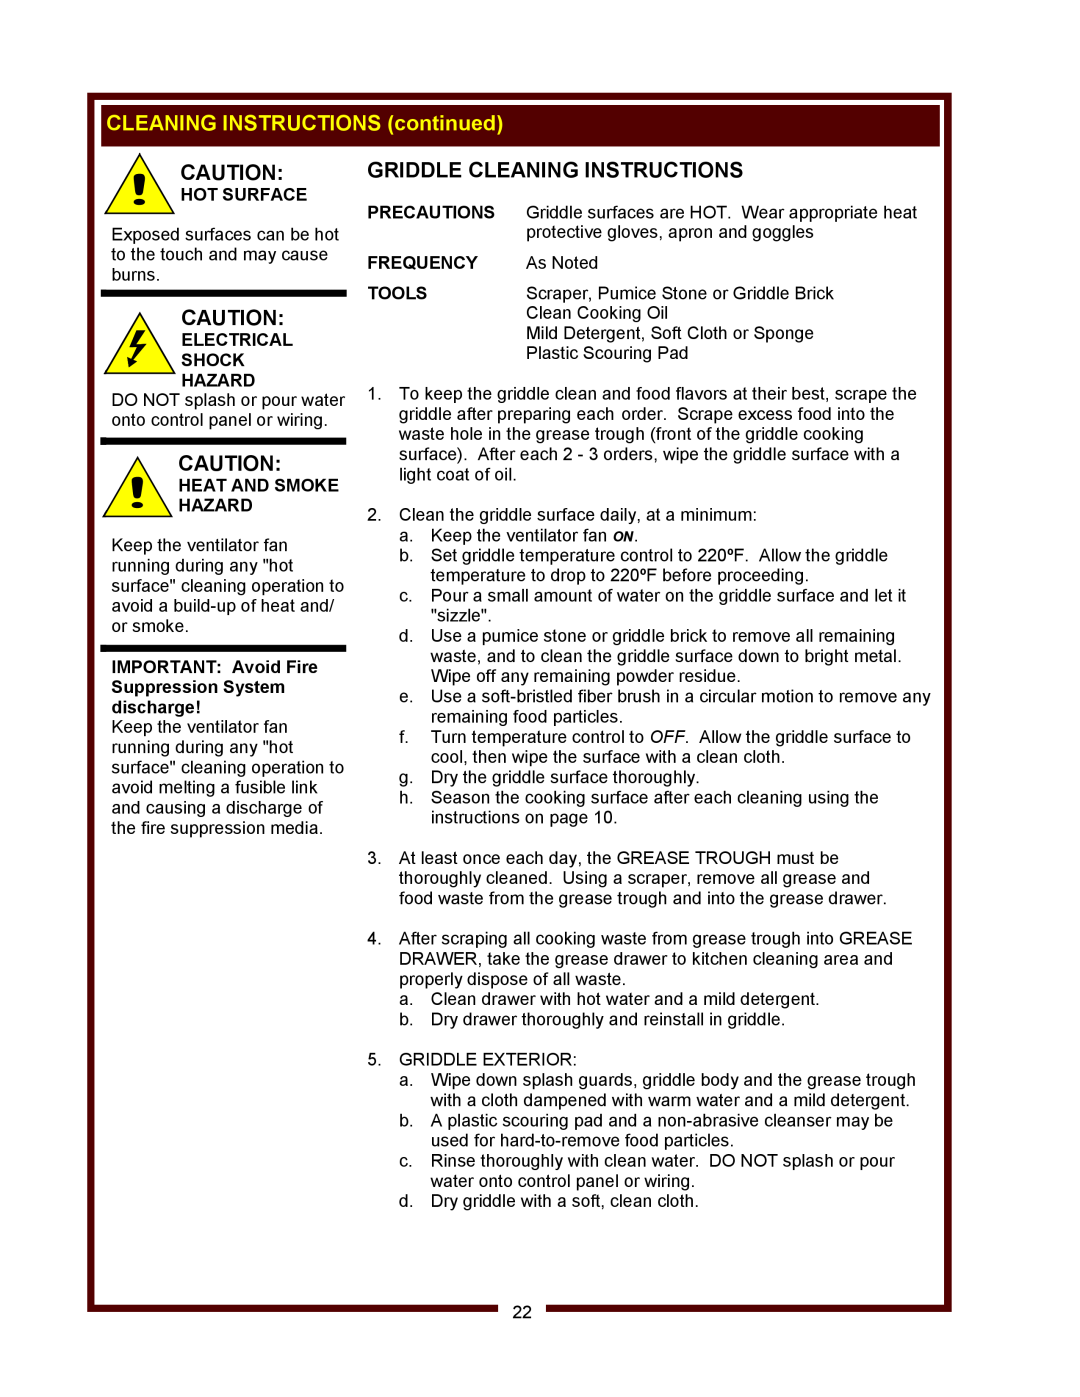 Wells WV-FGRW Griddle Cleaning Instructions, CLEANING INSTRUCTIONS continued, Hot Surface, Electrical Shock Hazard, Tools 